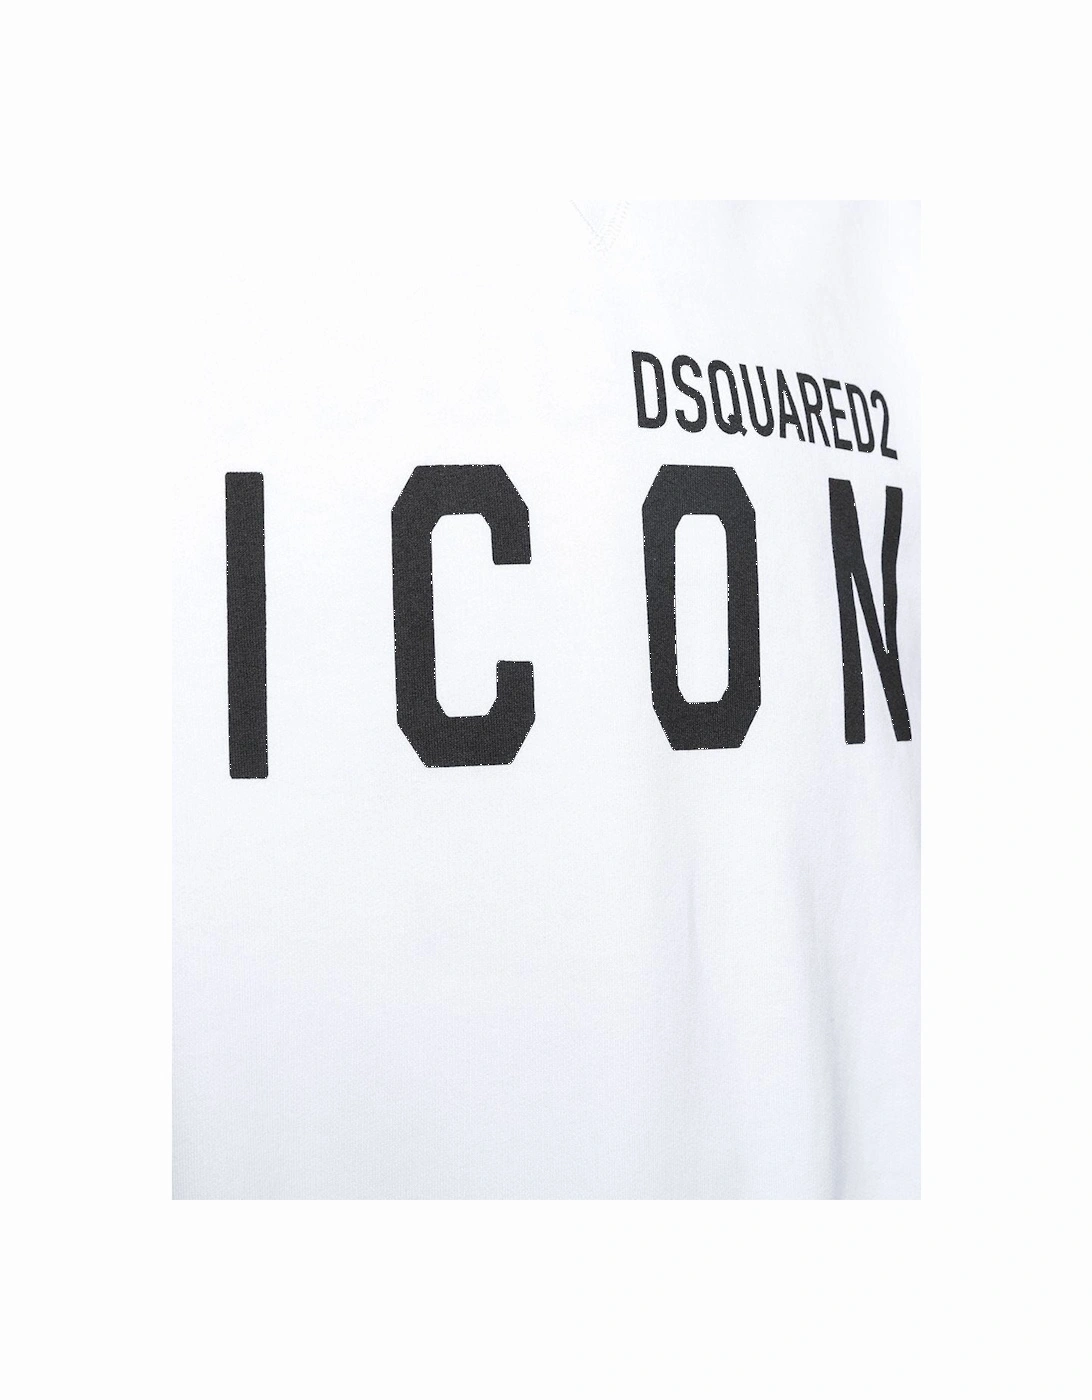 Icon Print Hoodie in White